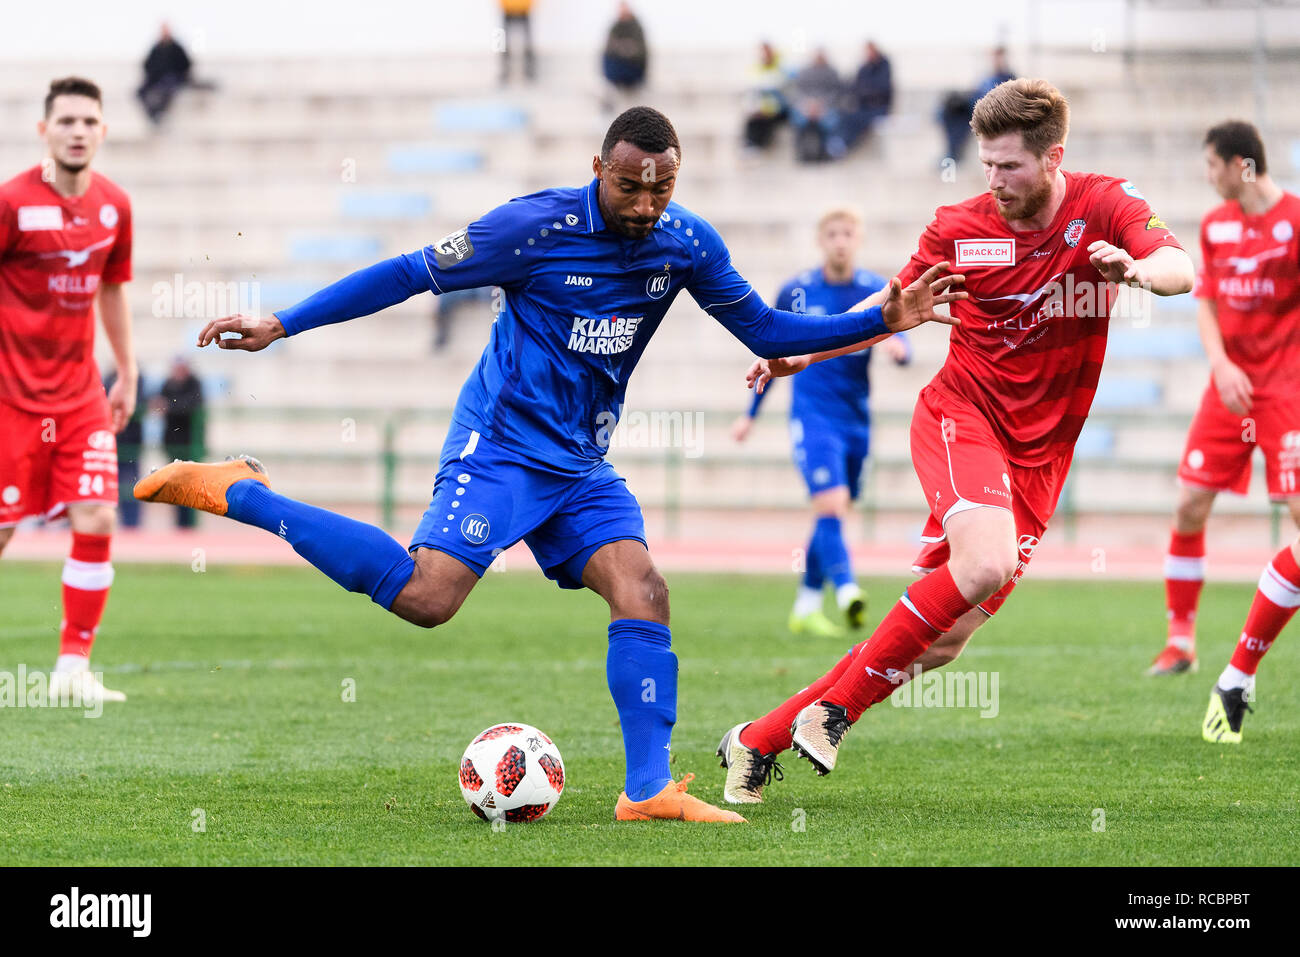 Malaga, Spanien. 15th Jan, 2019. Saliou Sane (KSC) in the duels with Sead Hajrovic (FC Winterthur). GES/Football/3rd League: Test match in training camp: Karlsruher SC - FC Winterthur, 15.01.2019 - Football/Soccer 3rd Division: Test match at training camp: Karlsruher SC - FC Winterthur, Malaga, Jan 15, 2019 - | usage worldwide Credit: dpa/Alamy Live News Stock Photo